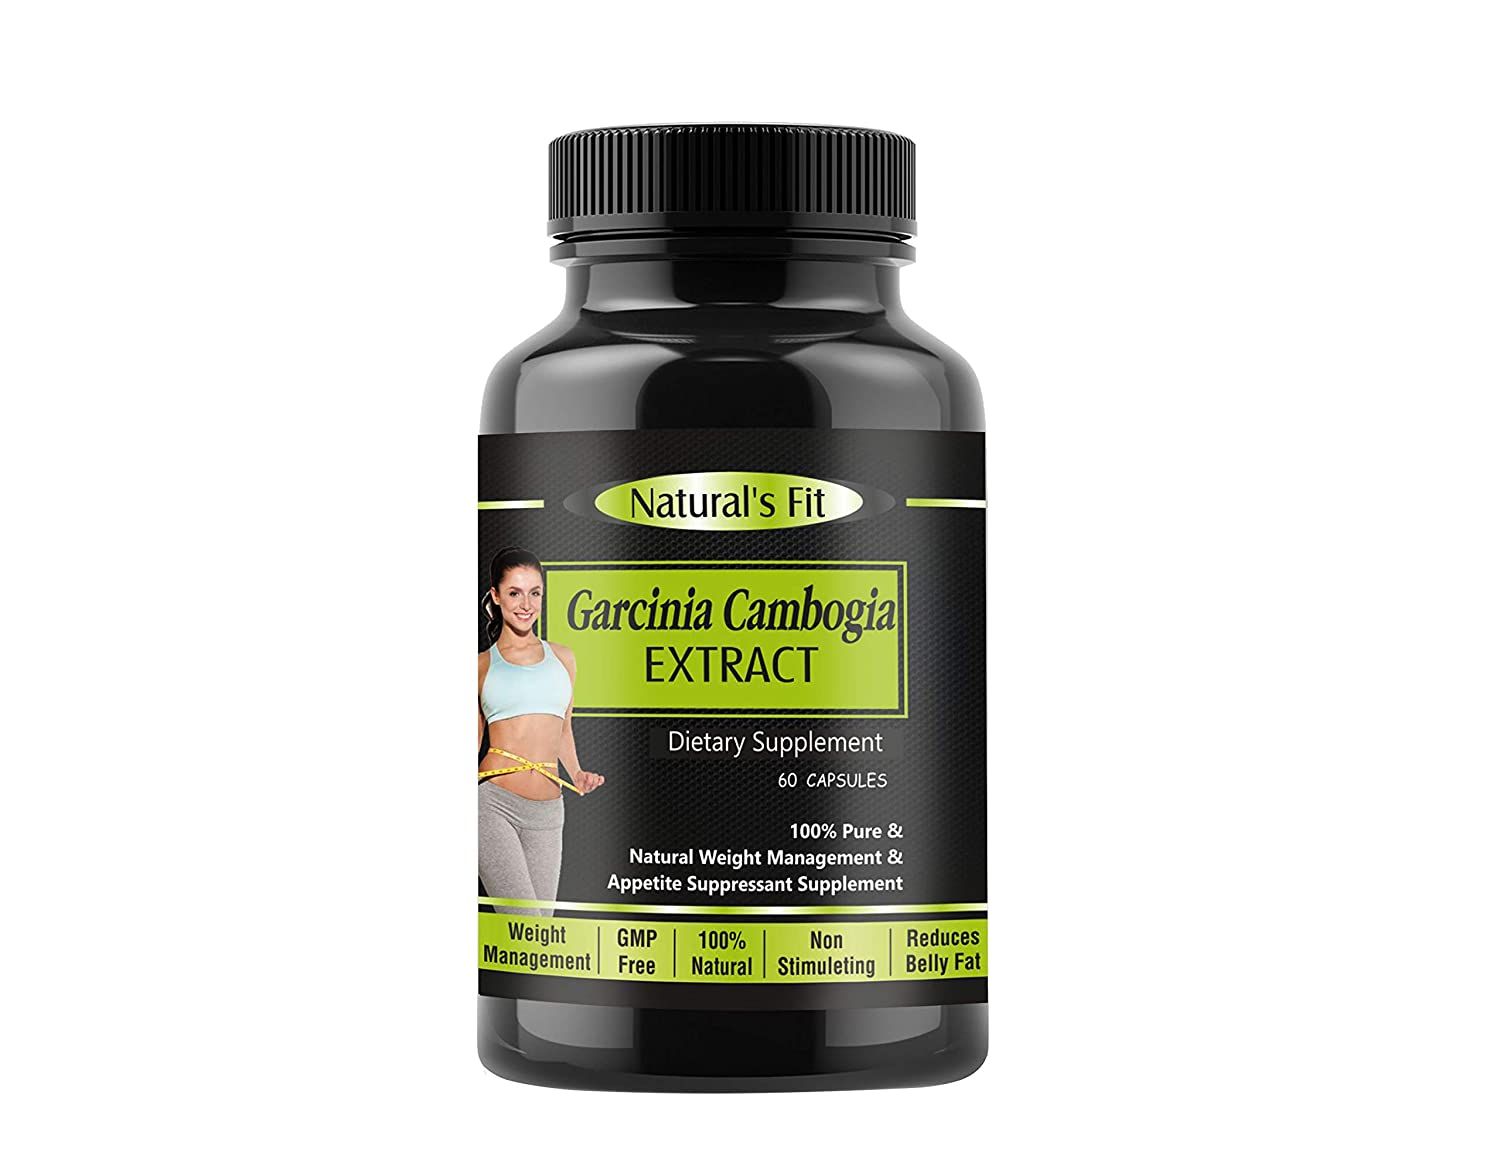 Natural's Fit Garcinia Cambdogia Extract Image